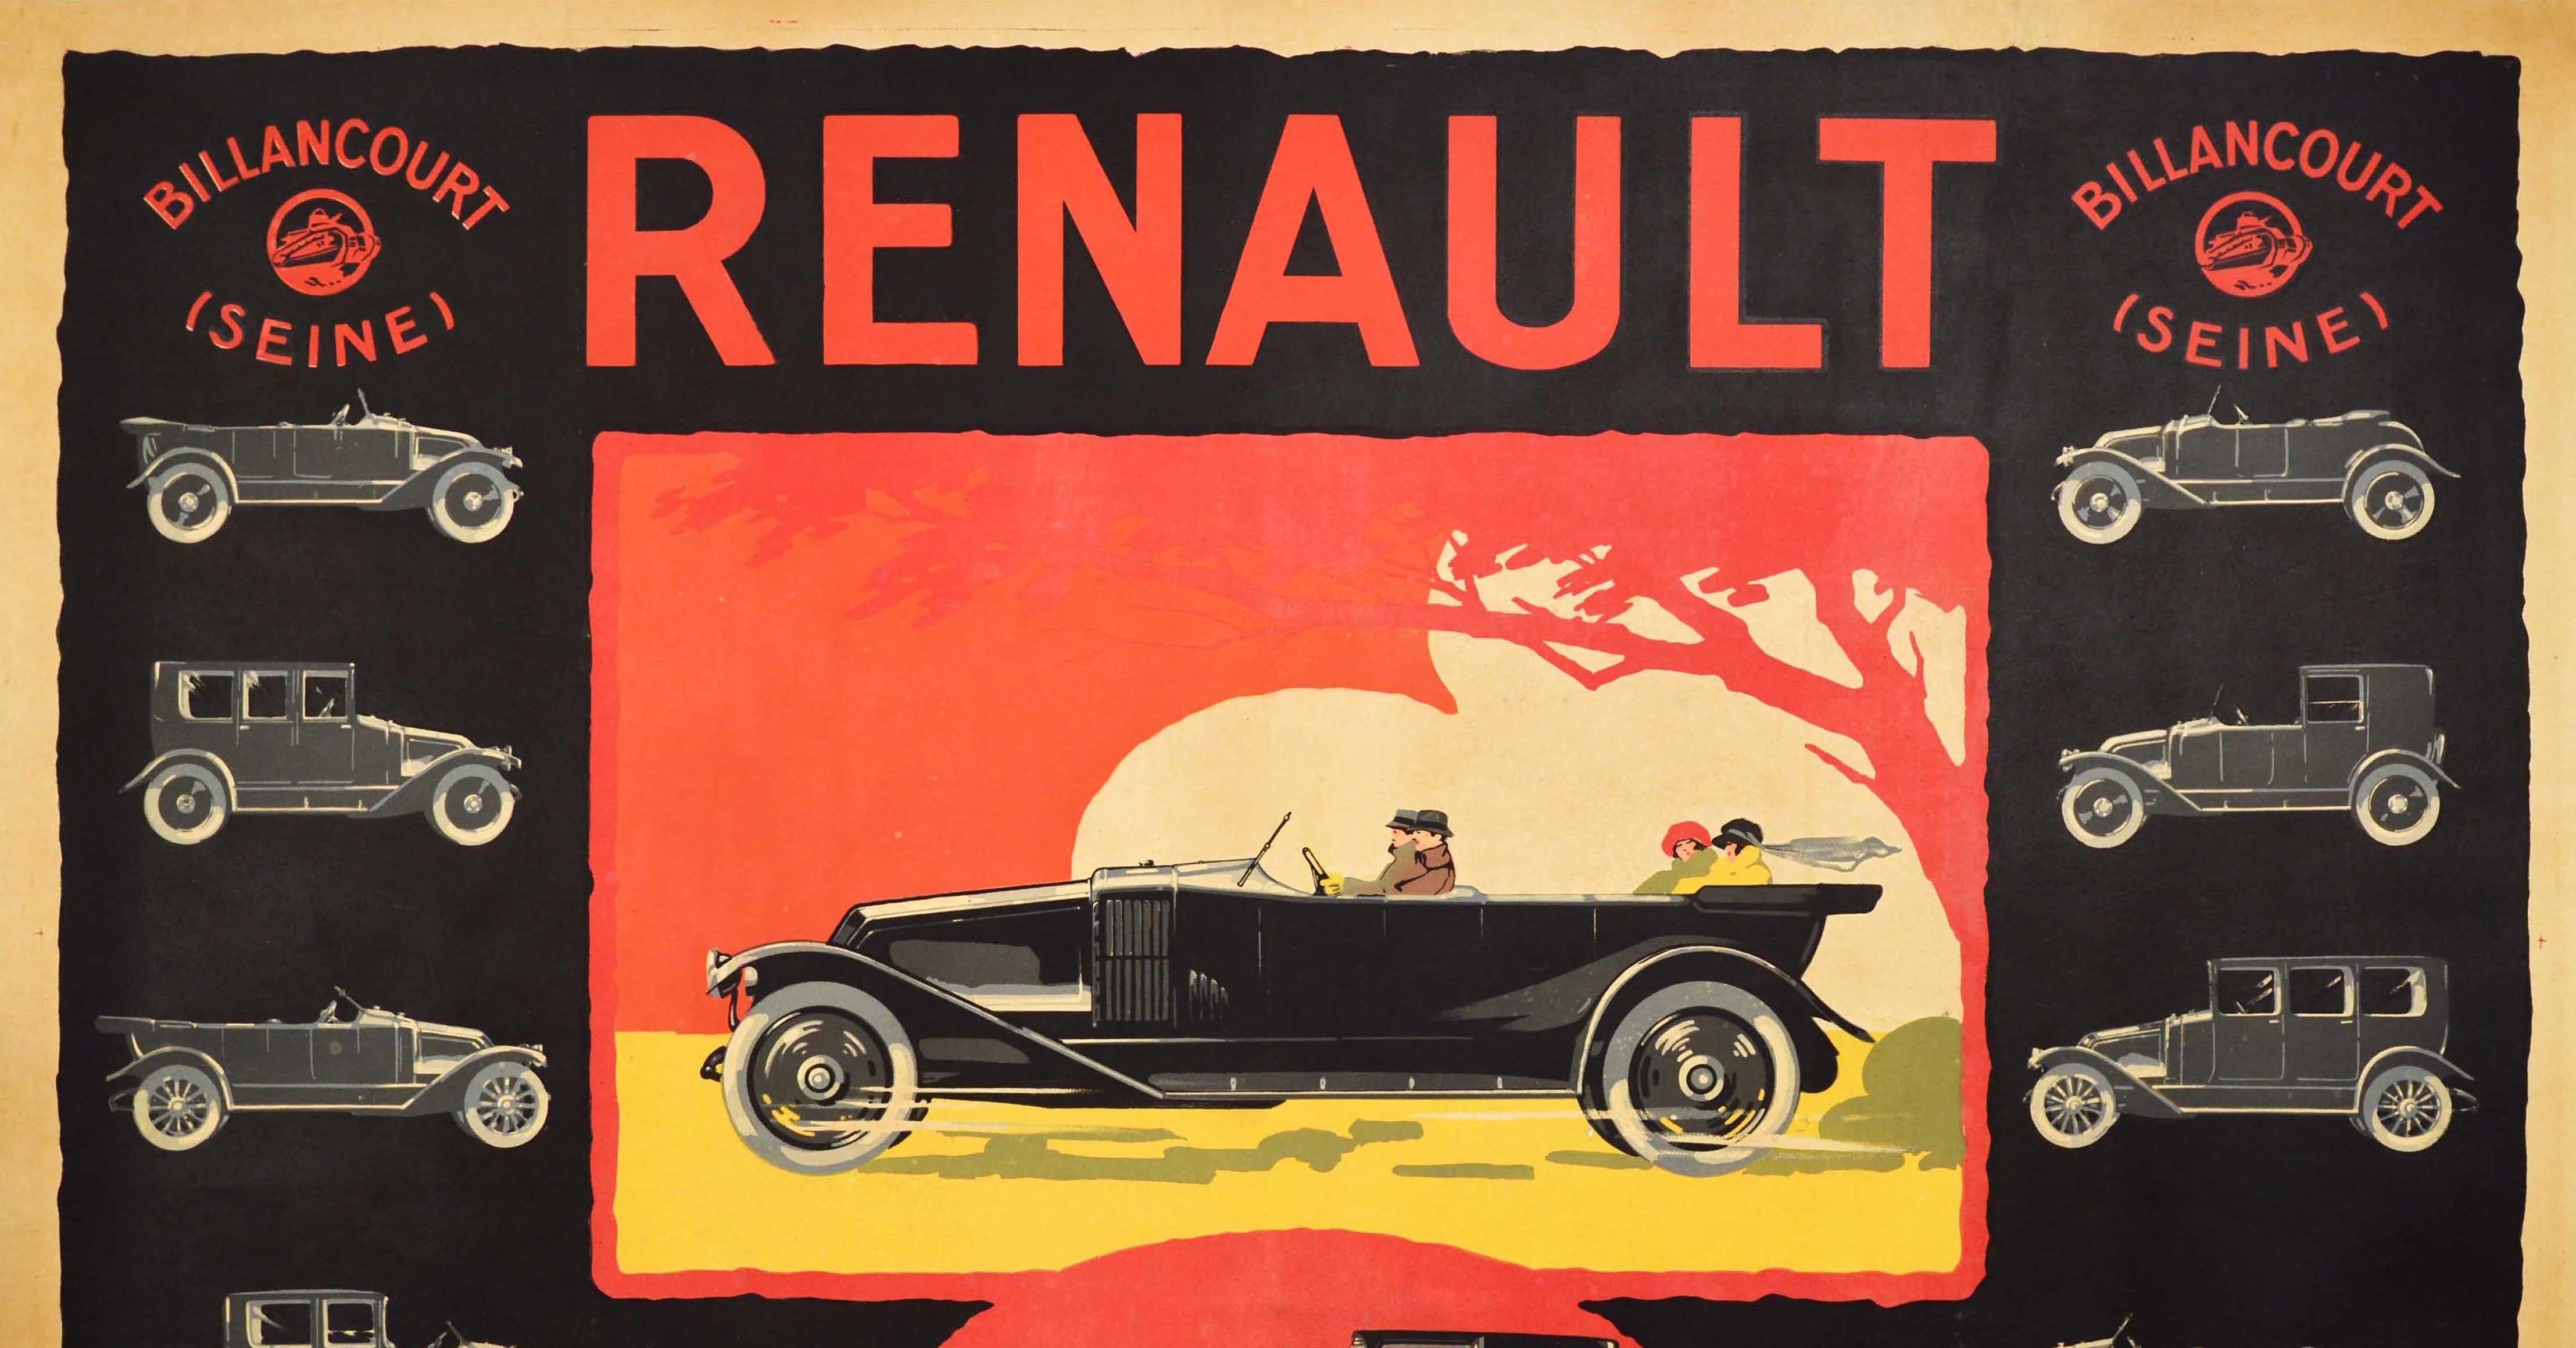 Original antique advertising poster for the French automobile manufacturer Renault featuring a great design showing different car models produced at their Billancourt (Seine) factory on a dark background with colorful Art Deco style images in the